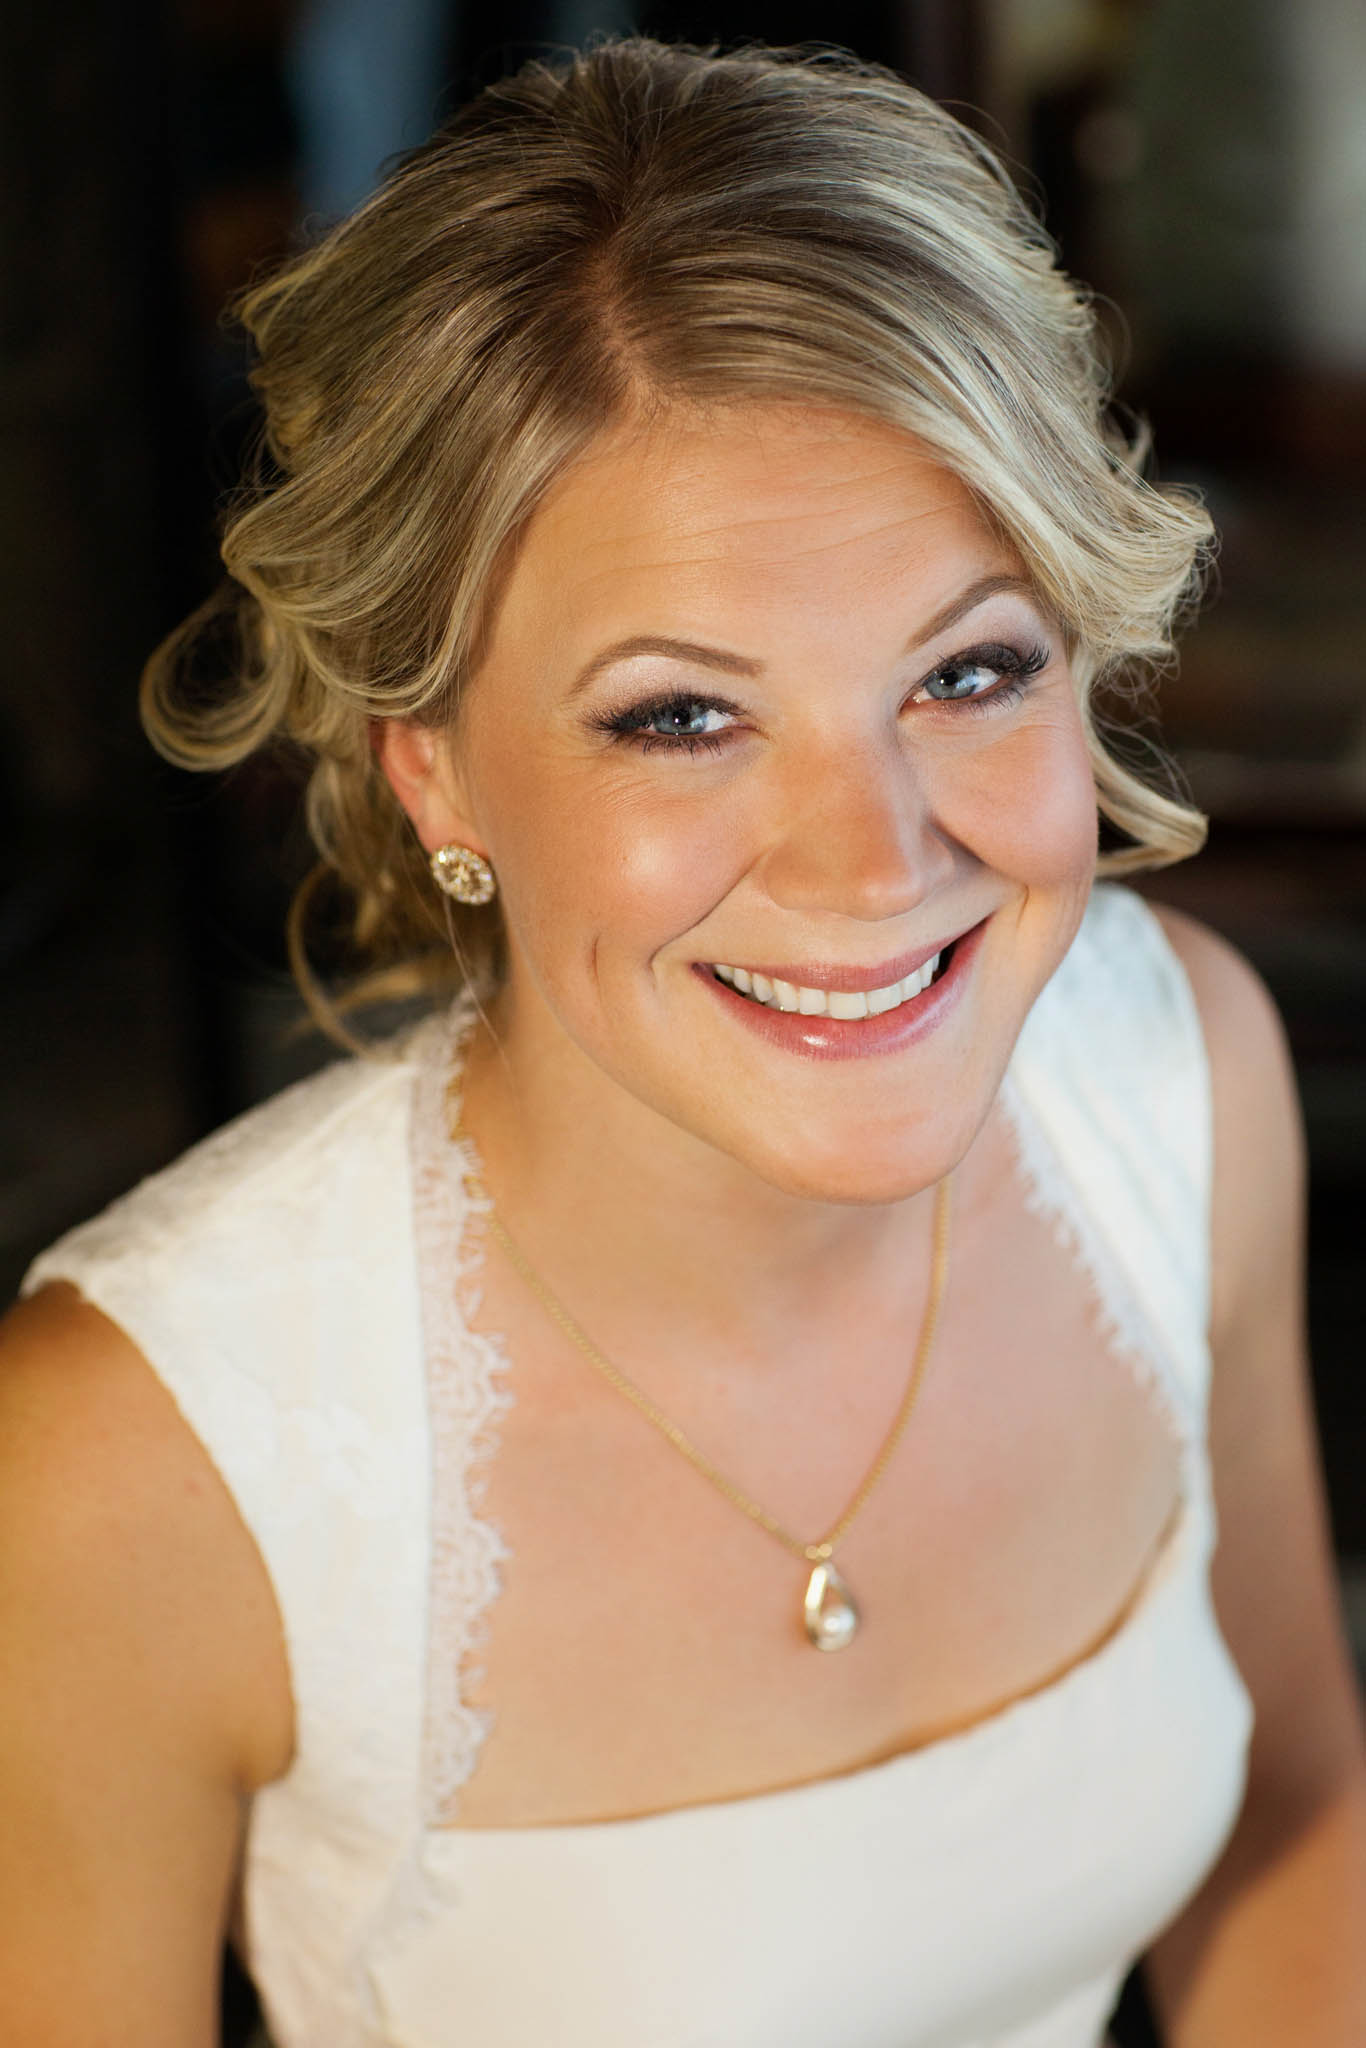 brie getting ready close-up smiling – South Lake Tahoe lakefront beach wedding nina photographer